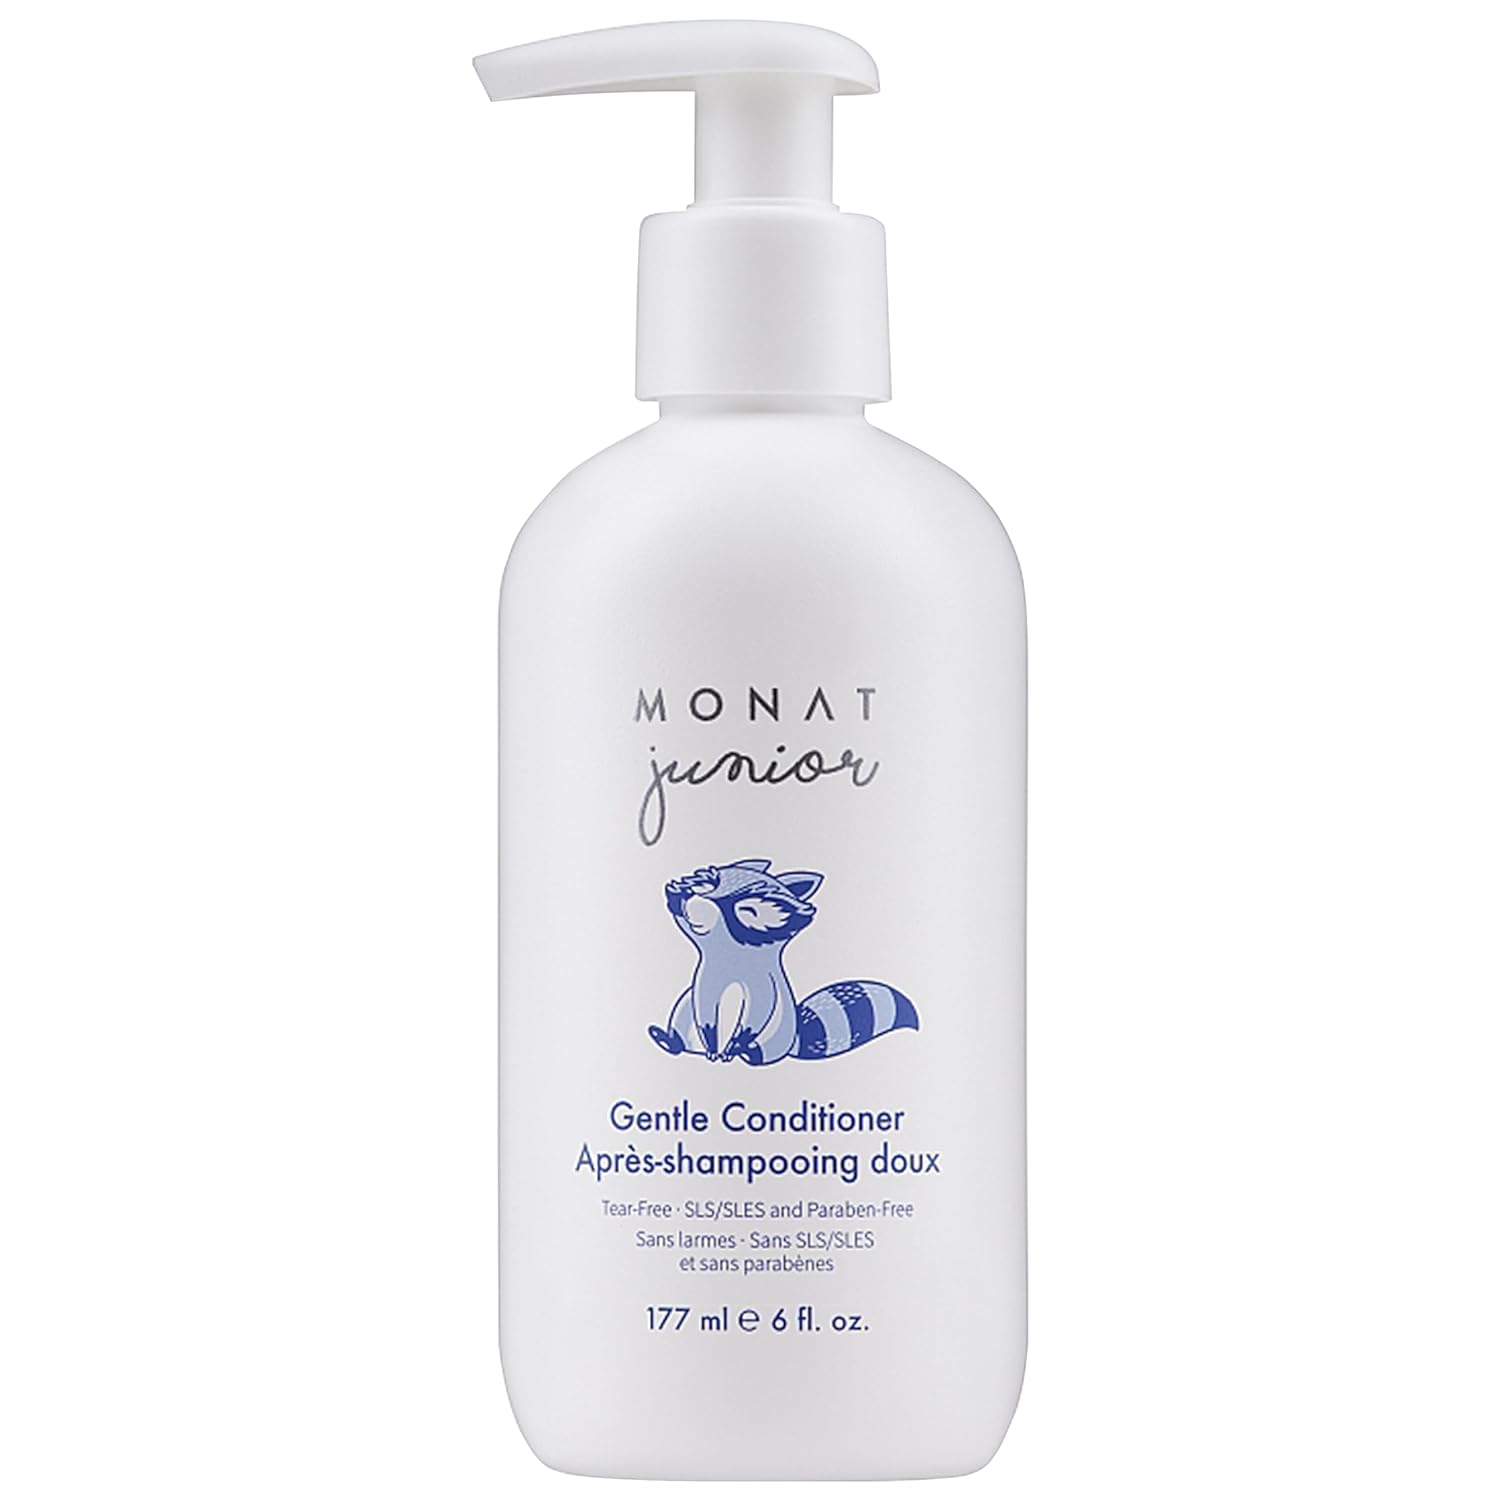 MONAT Junior™ Gentle Conditioner - A safe and gentle Anti Frizz Hair Conditioner for children that rinses out quickly. All Natural Tear-free, Sulfate & Paraben-free - Net Wt. 177 ml e / 6 fl. Oz